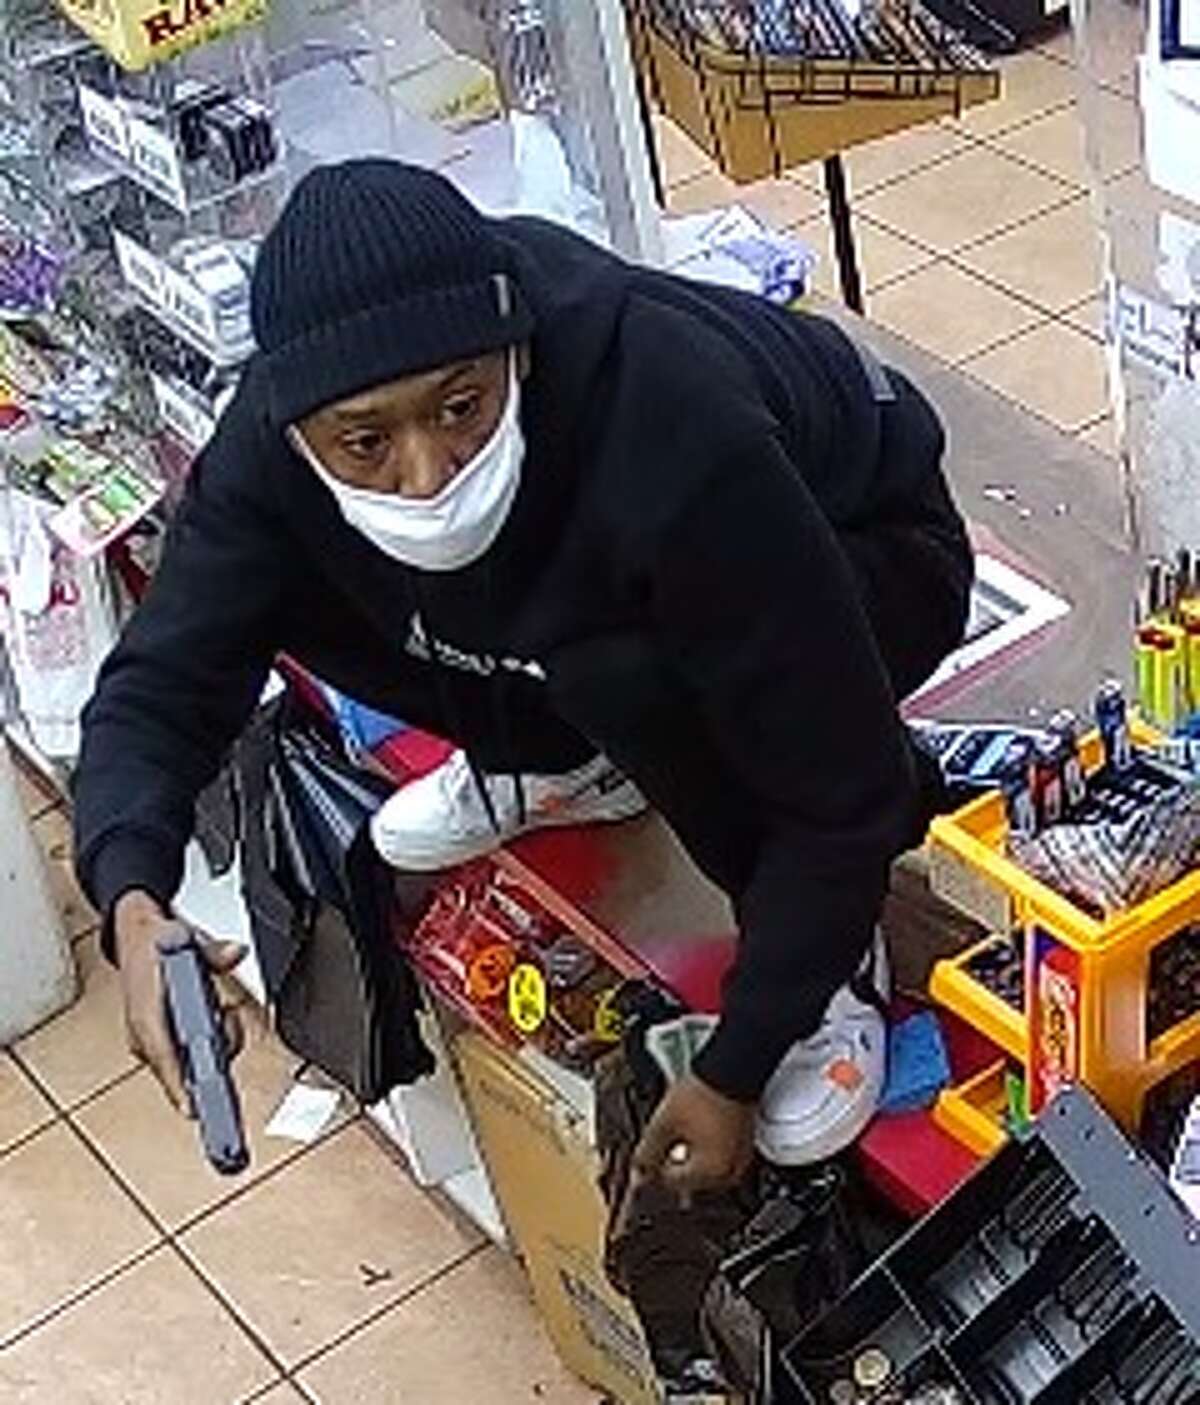 Beaumont police are asking or help identifying this person.